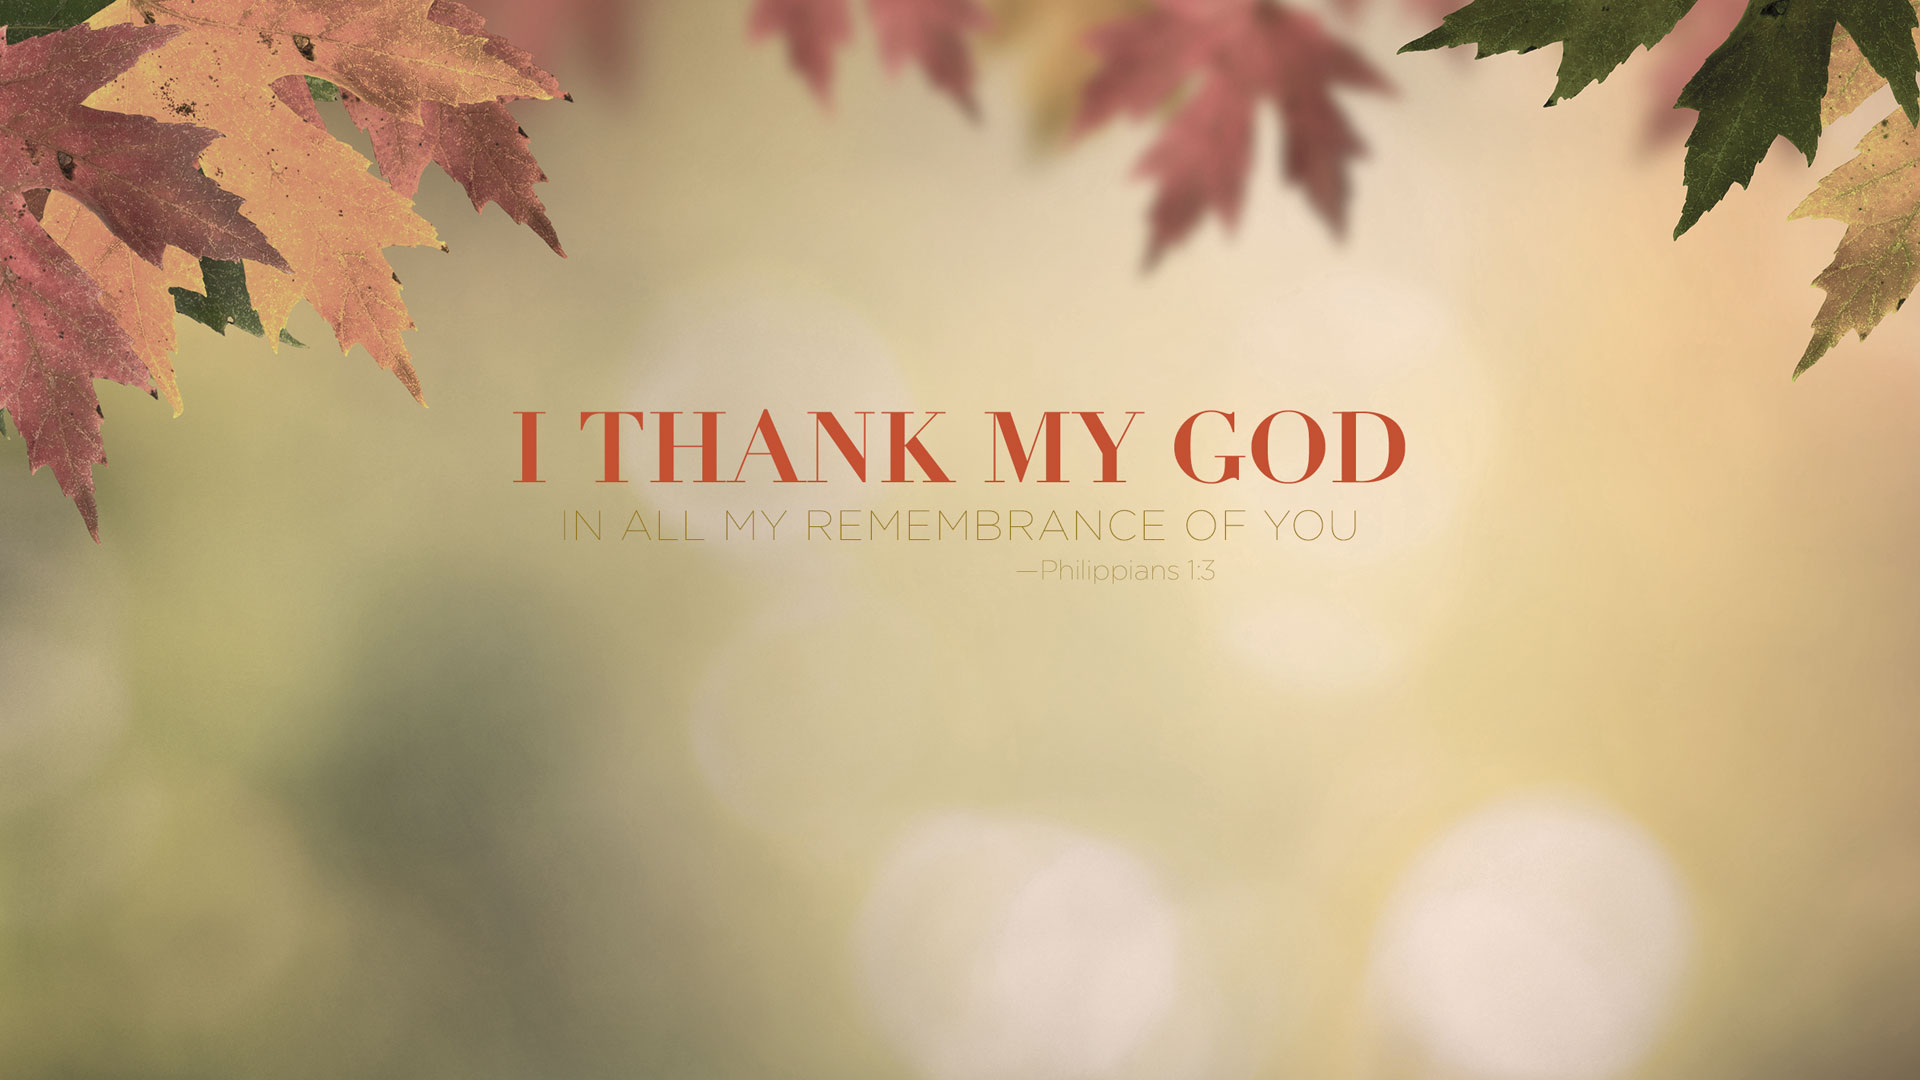 Wednesday Wallpaper: I Thank My God in All My Remembrance of You